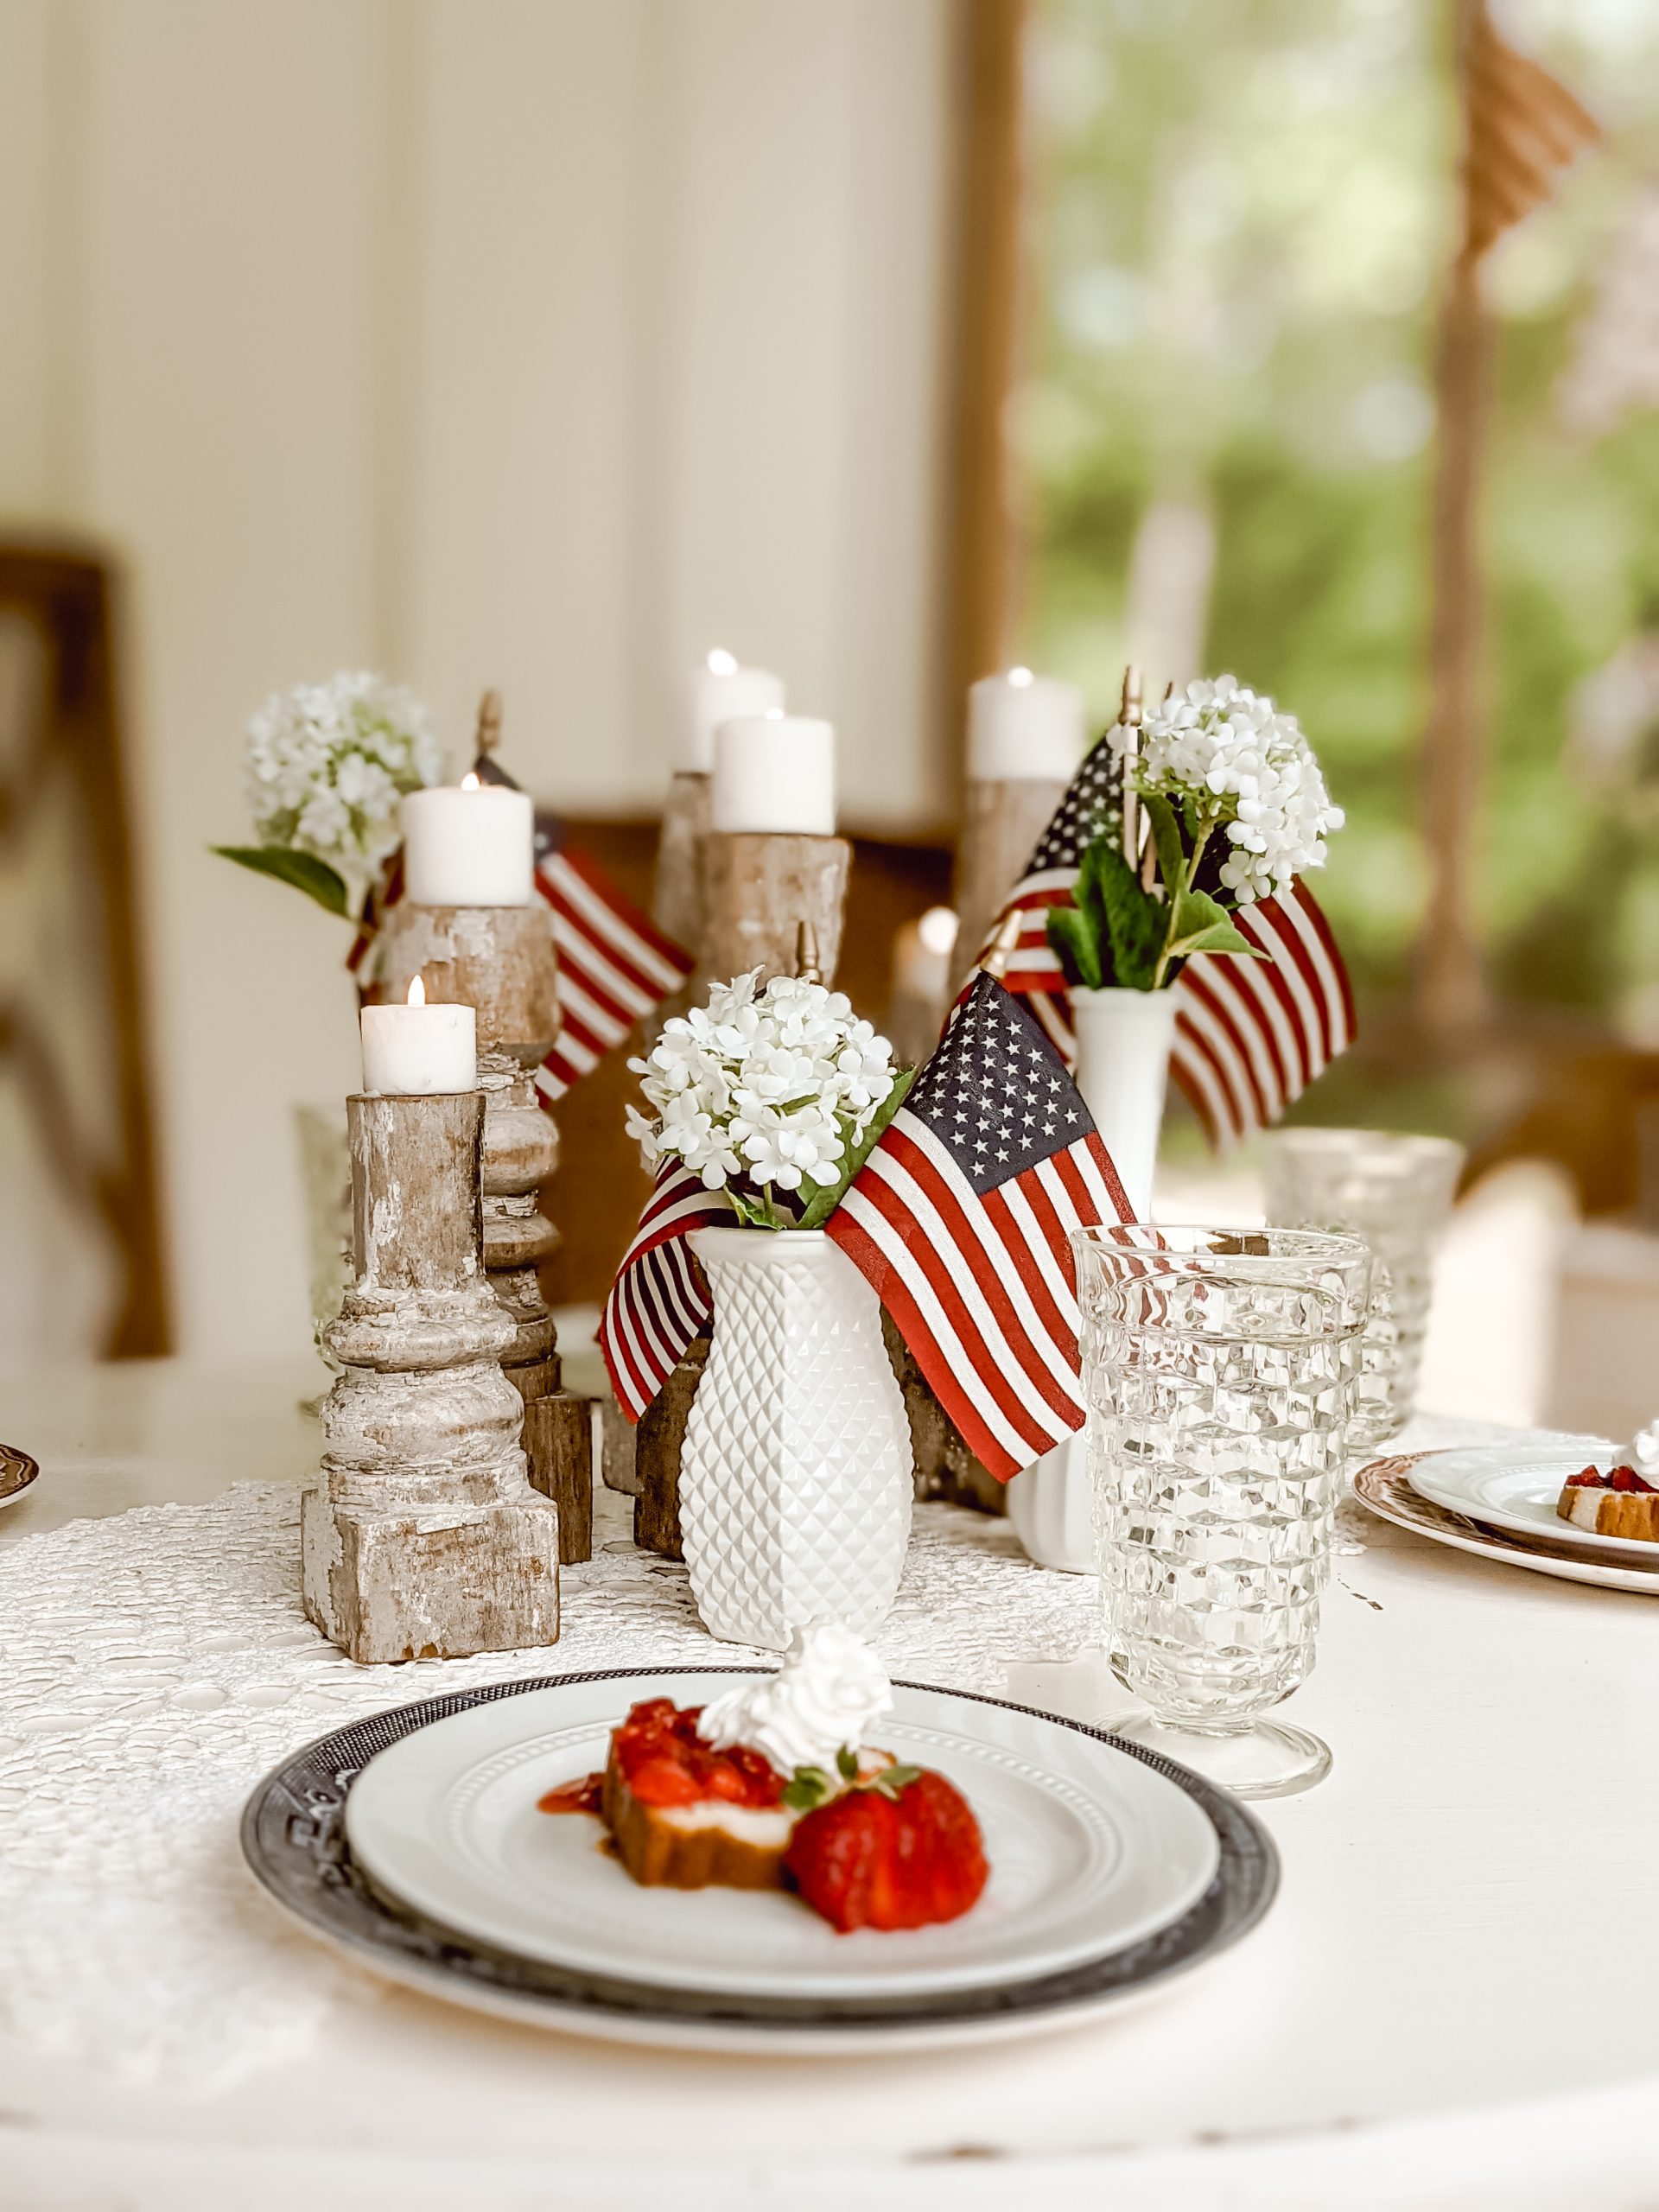 chippy white candlesticks, mini flags, and milk glass in red, white and blue centerpiece